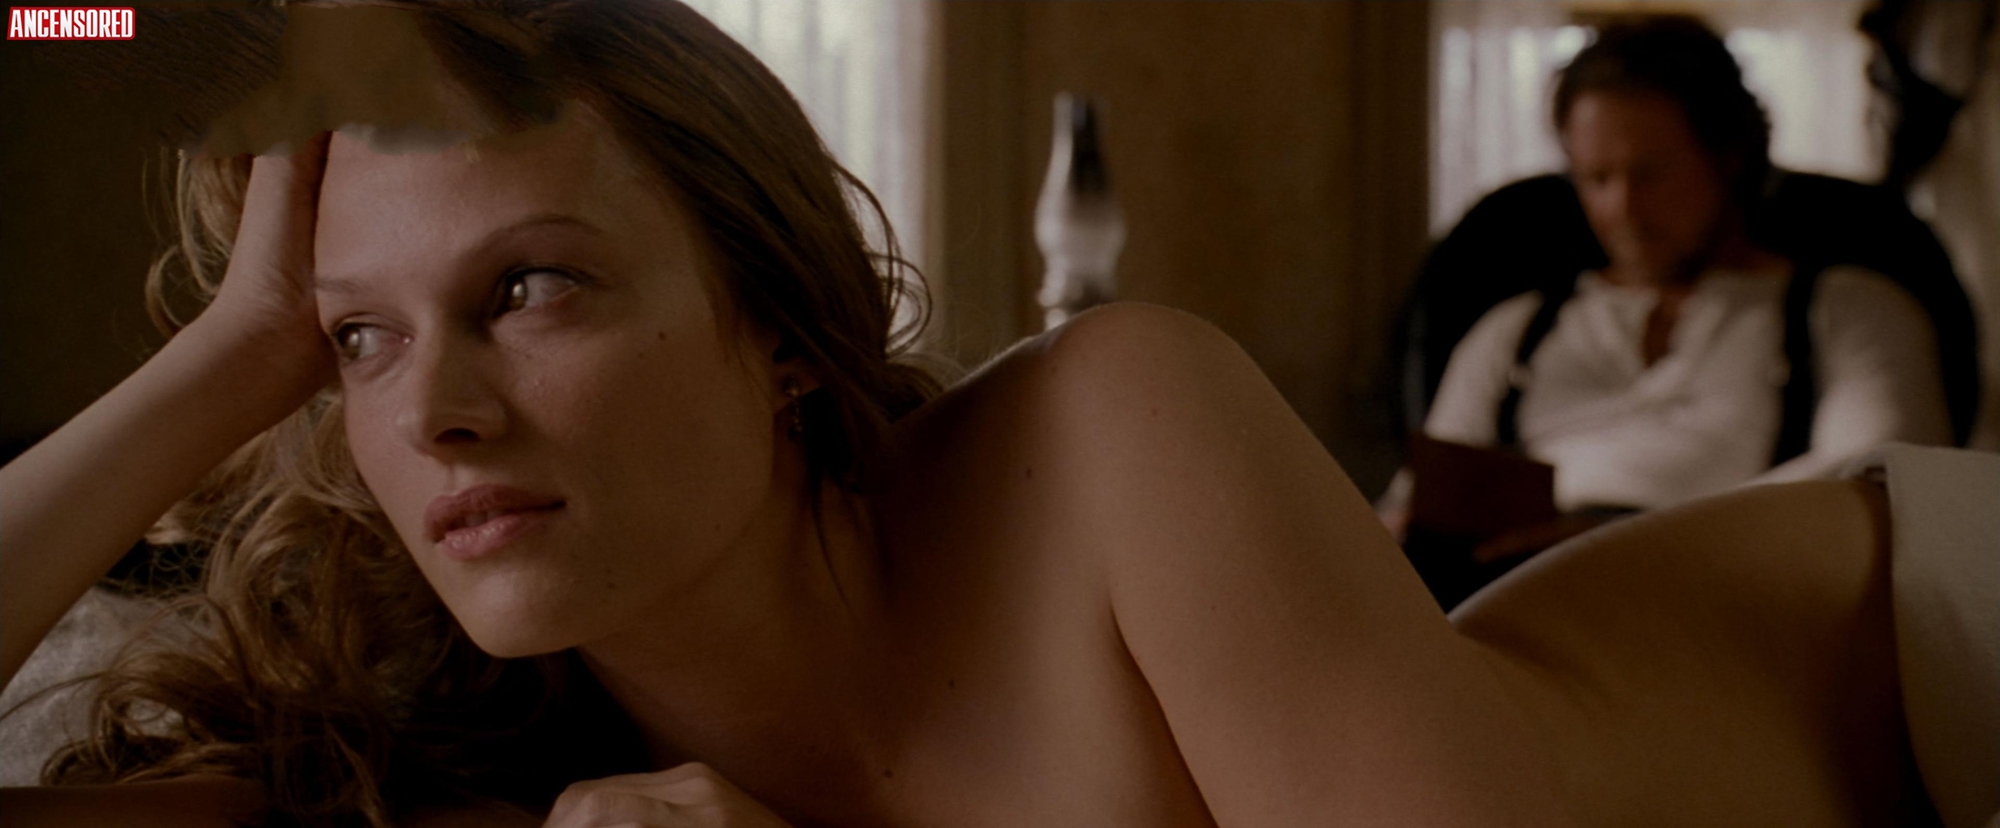 Has vinessa shaw ever been nude